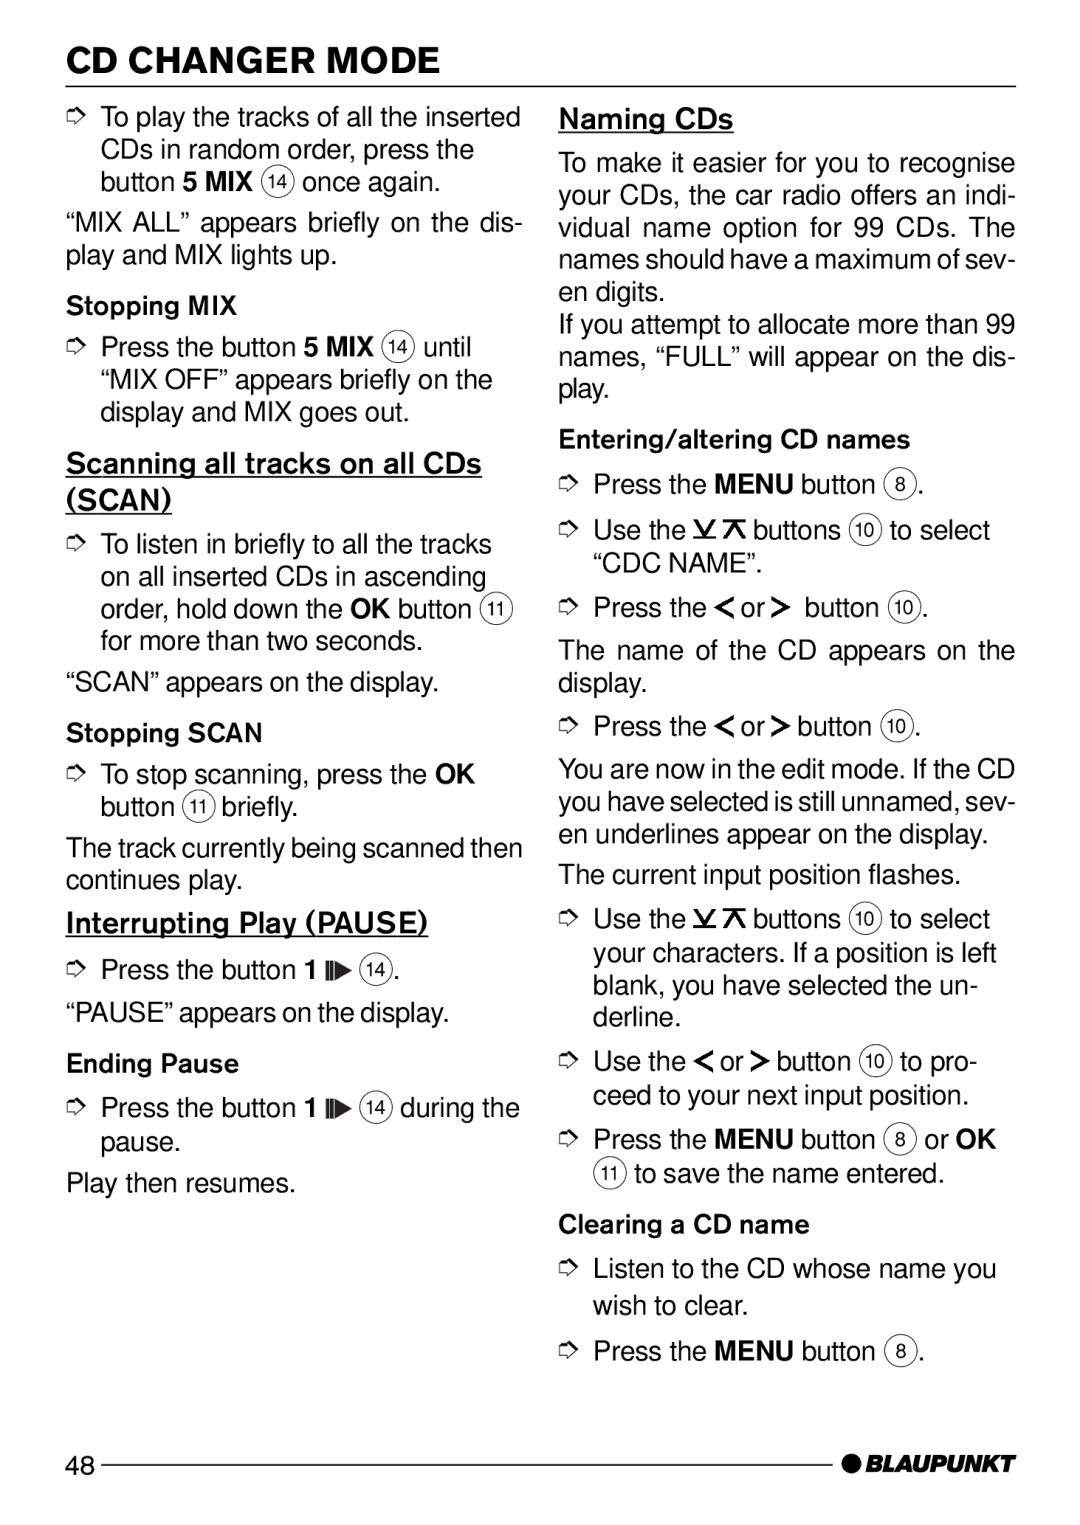 Blaupunkt CD52 operating instructions Scanning all tracks on all CDs Scan, Interrupting Play Pause 